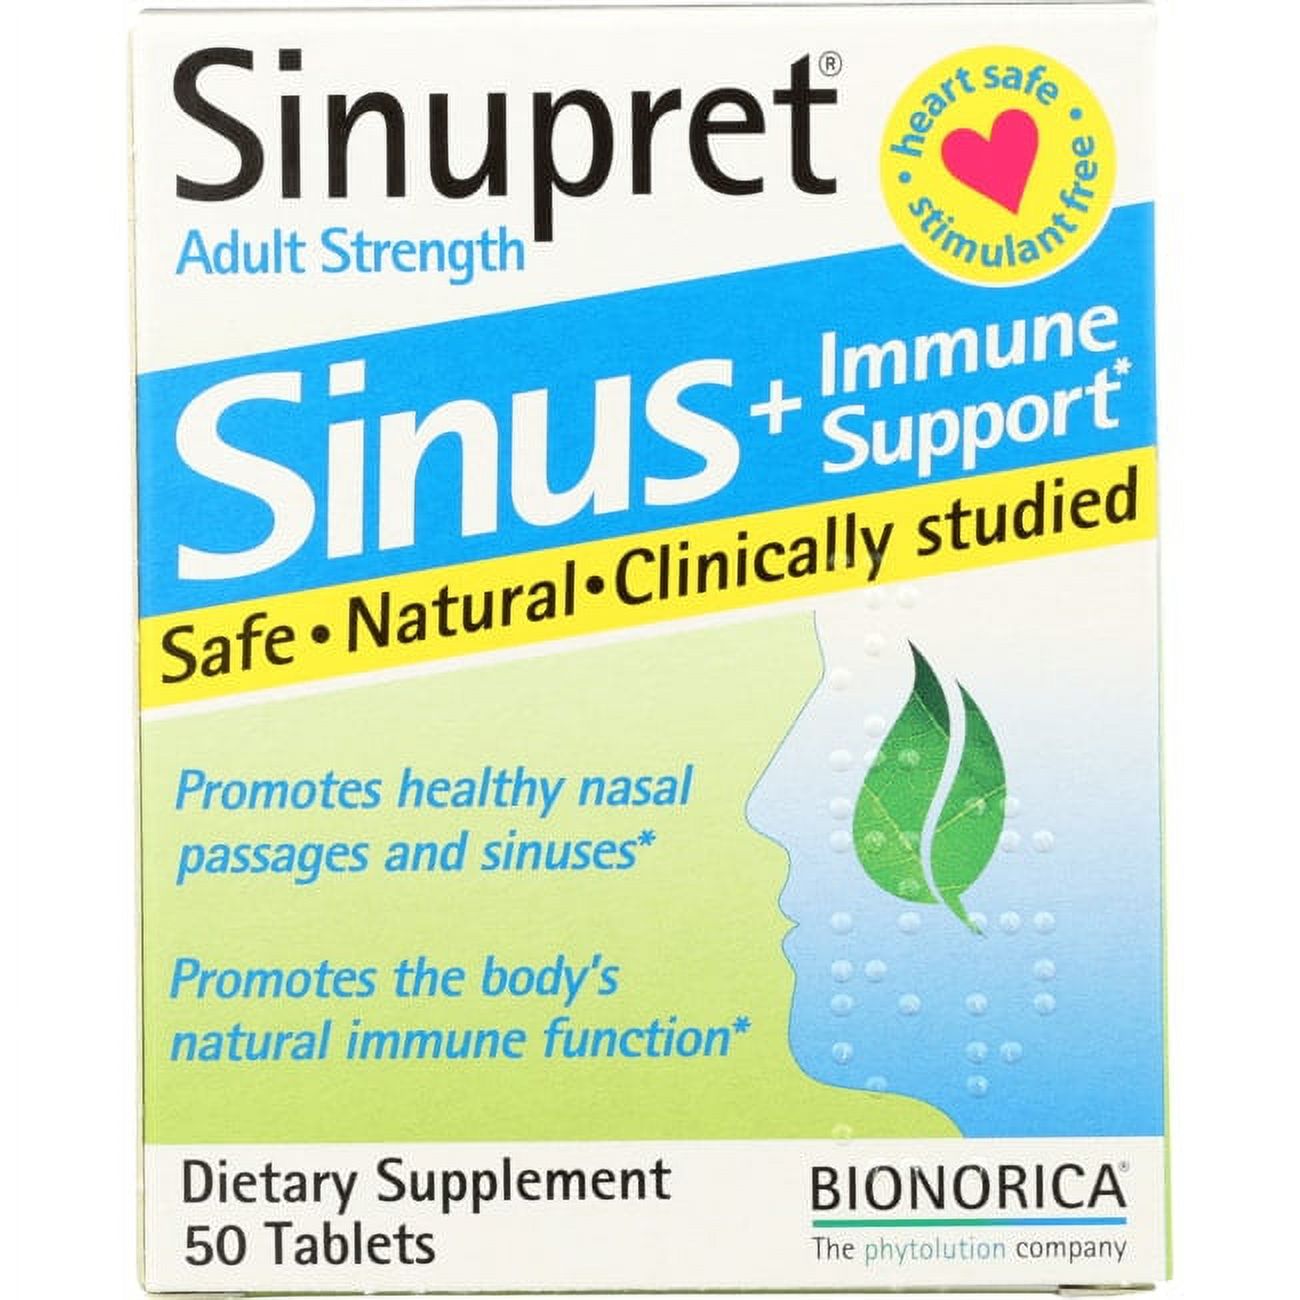 Bionorica Sinupret Adult Strength 50 Tabs - image 1 of 2